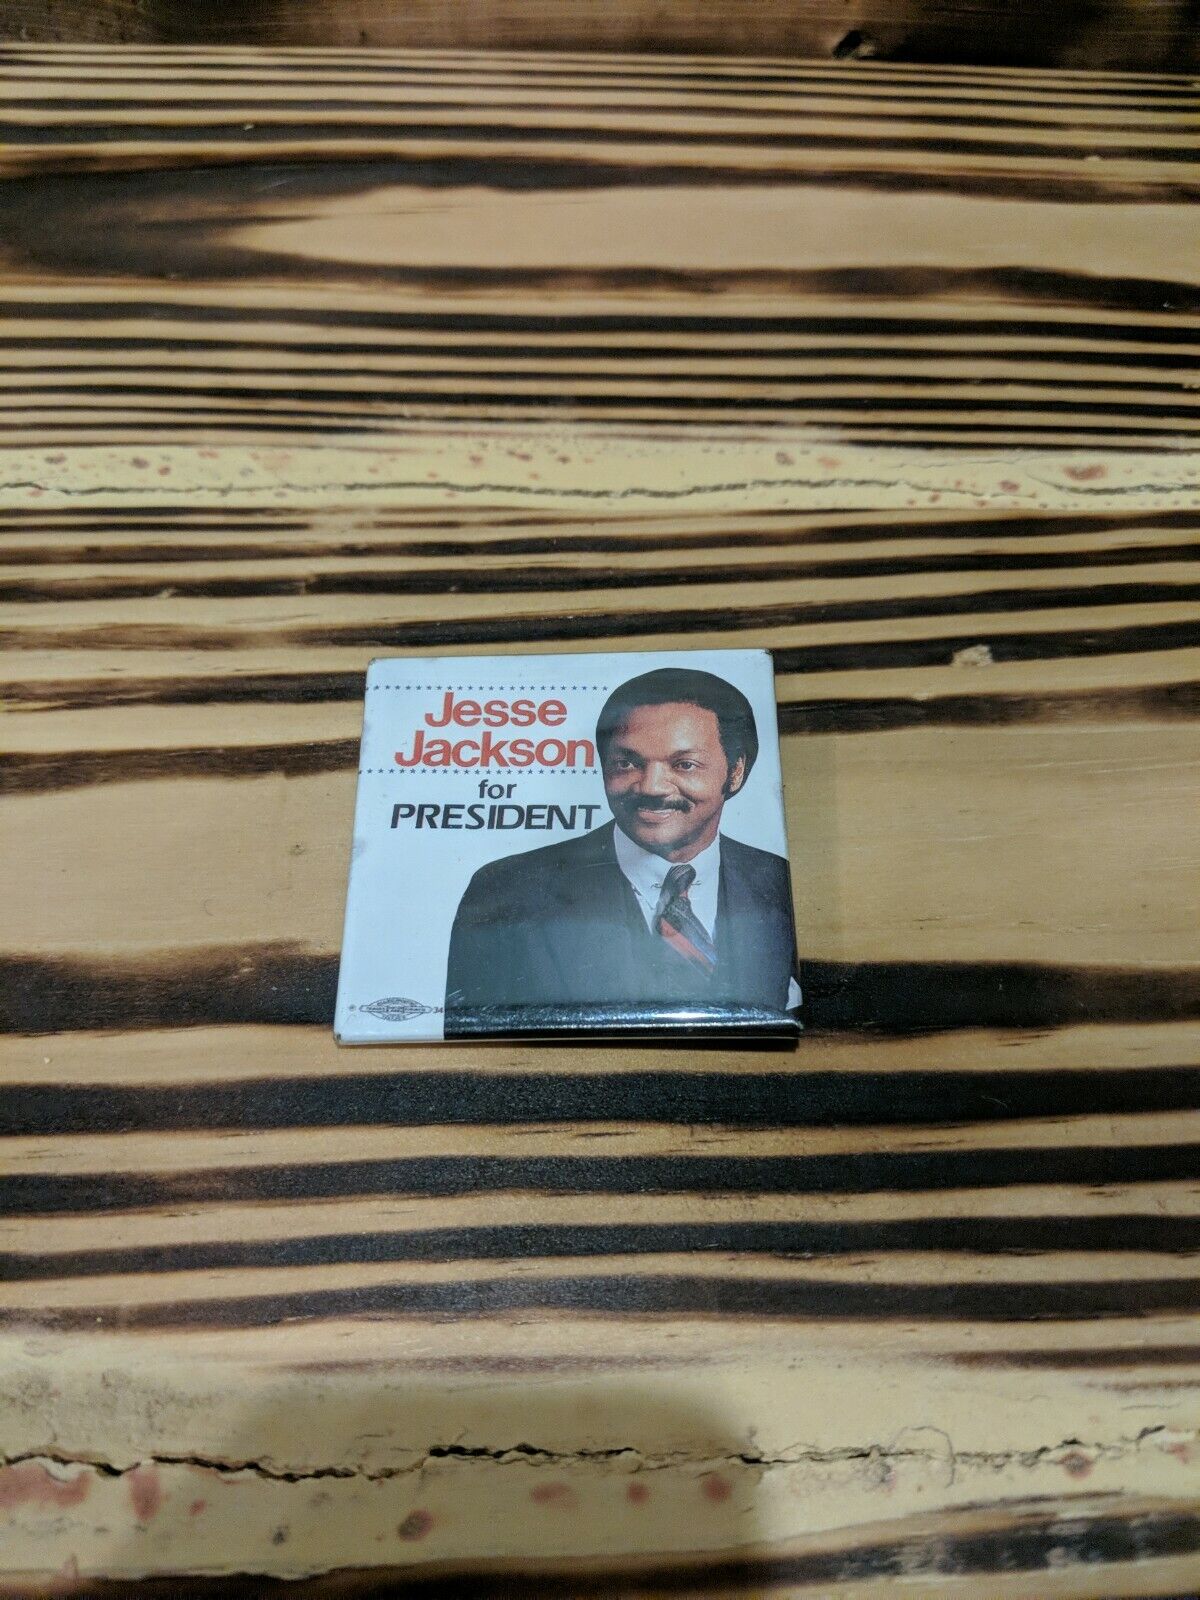 JESSE JACKSON FOR PRESIDENT Square Pin Back Button - 1984? 1988? Vintage 2x2 in